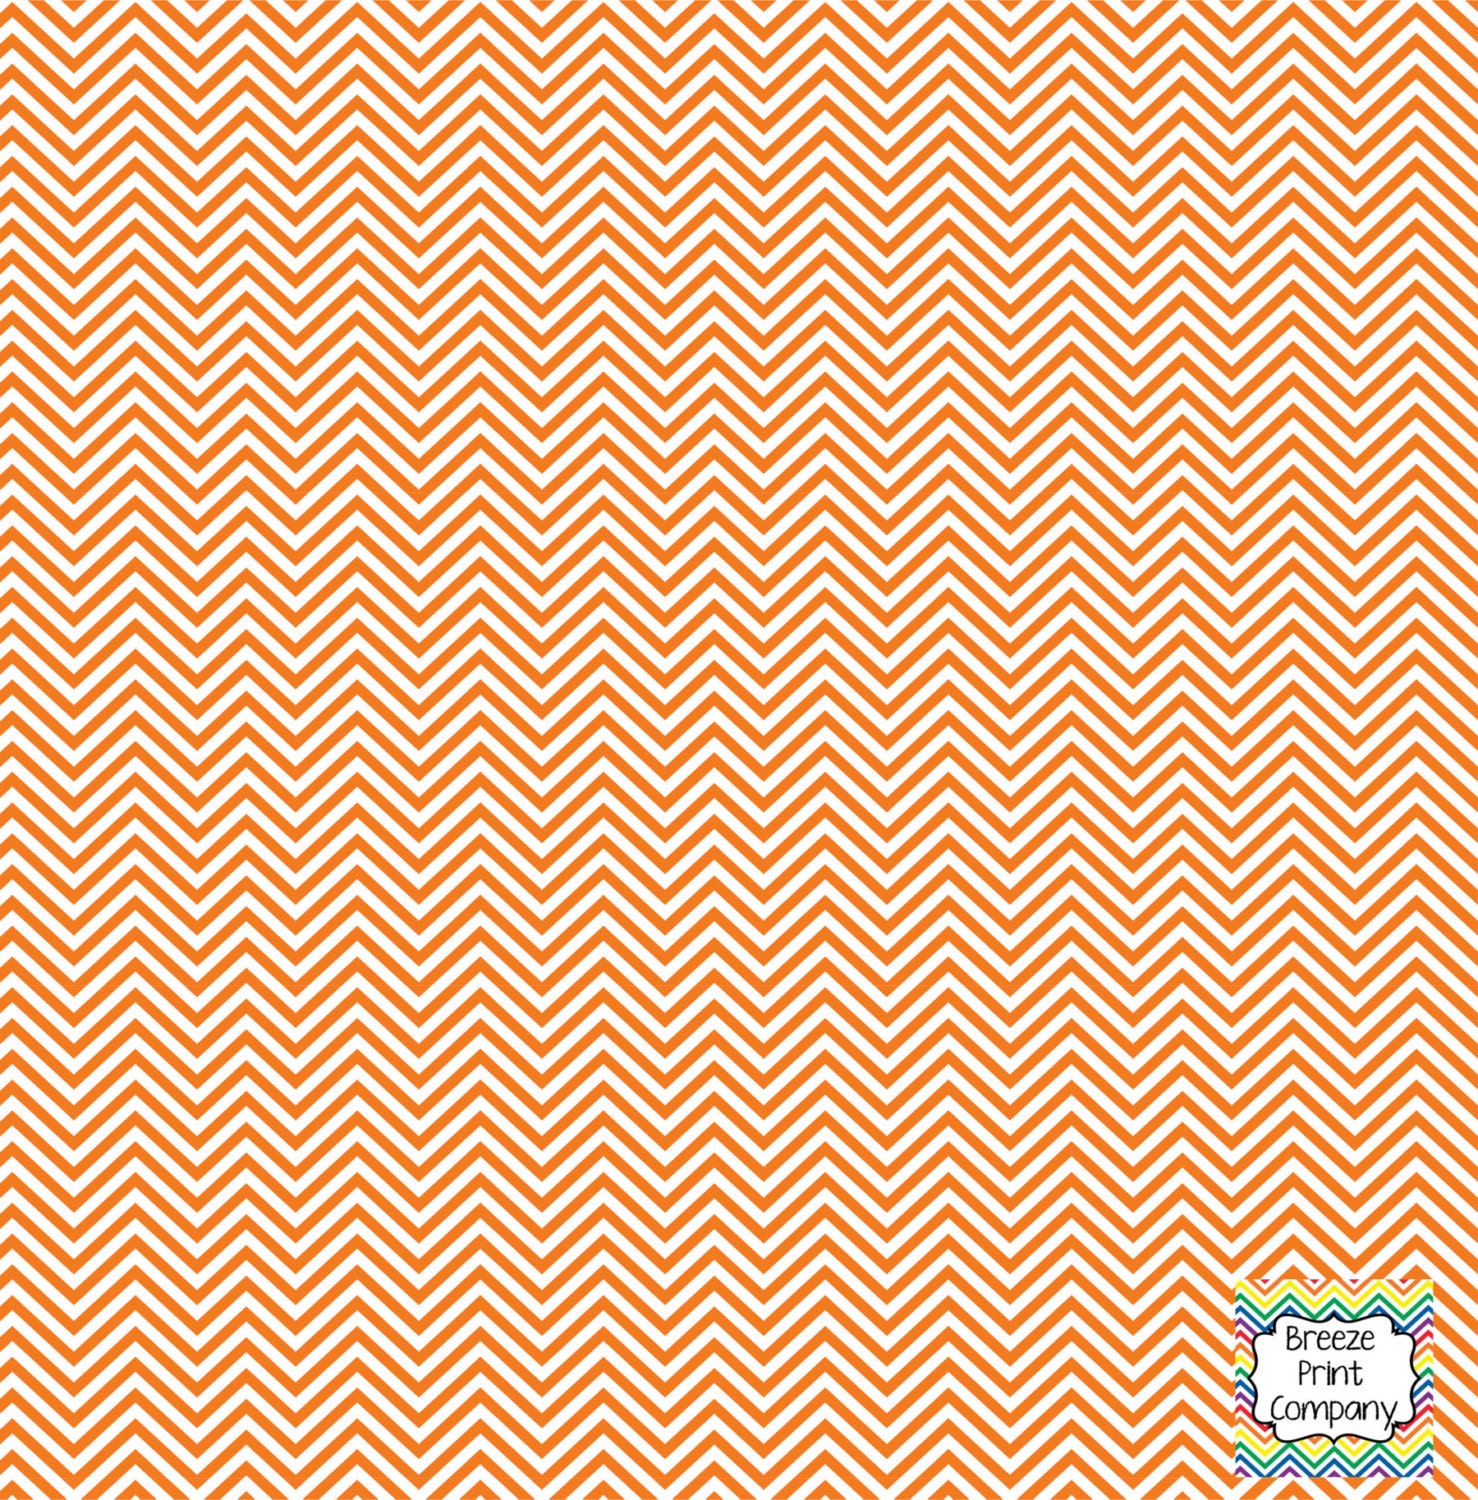 Ombre Patterned Vinyl, Red, Orange and Yellow HTV Vinyl or